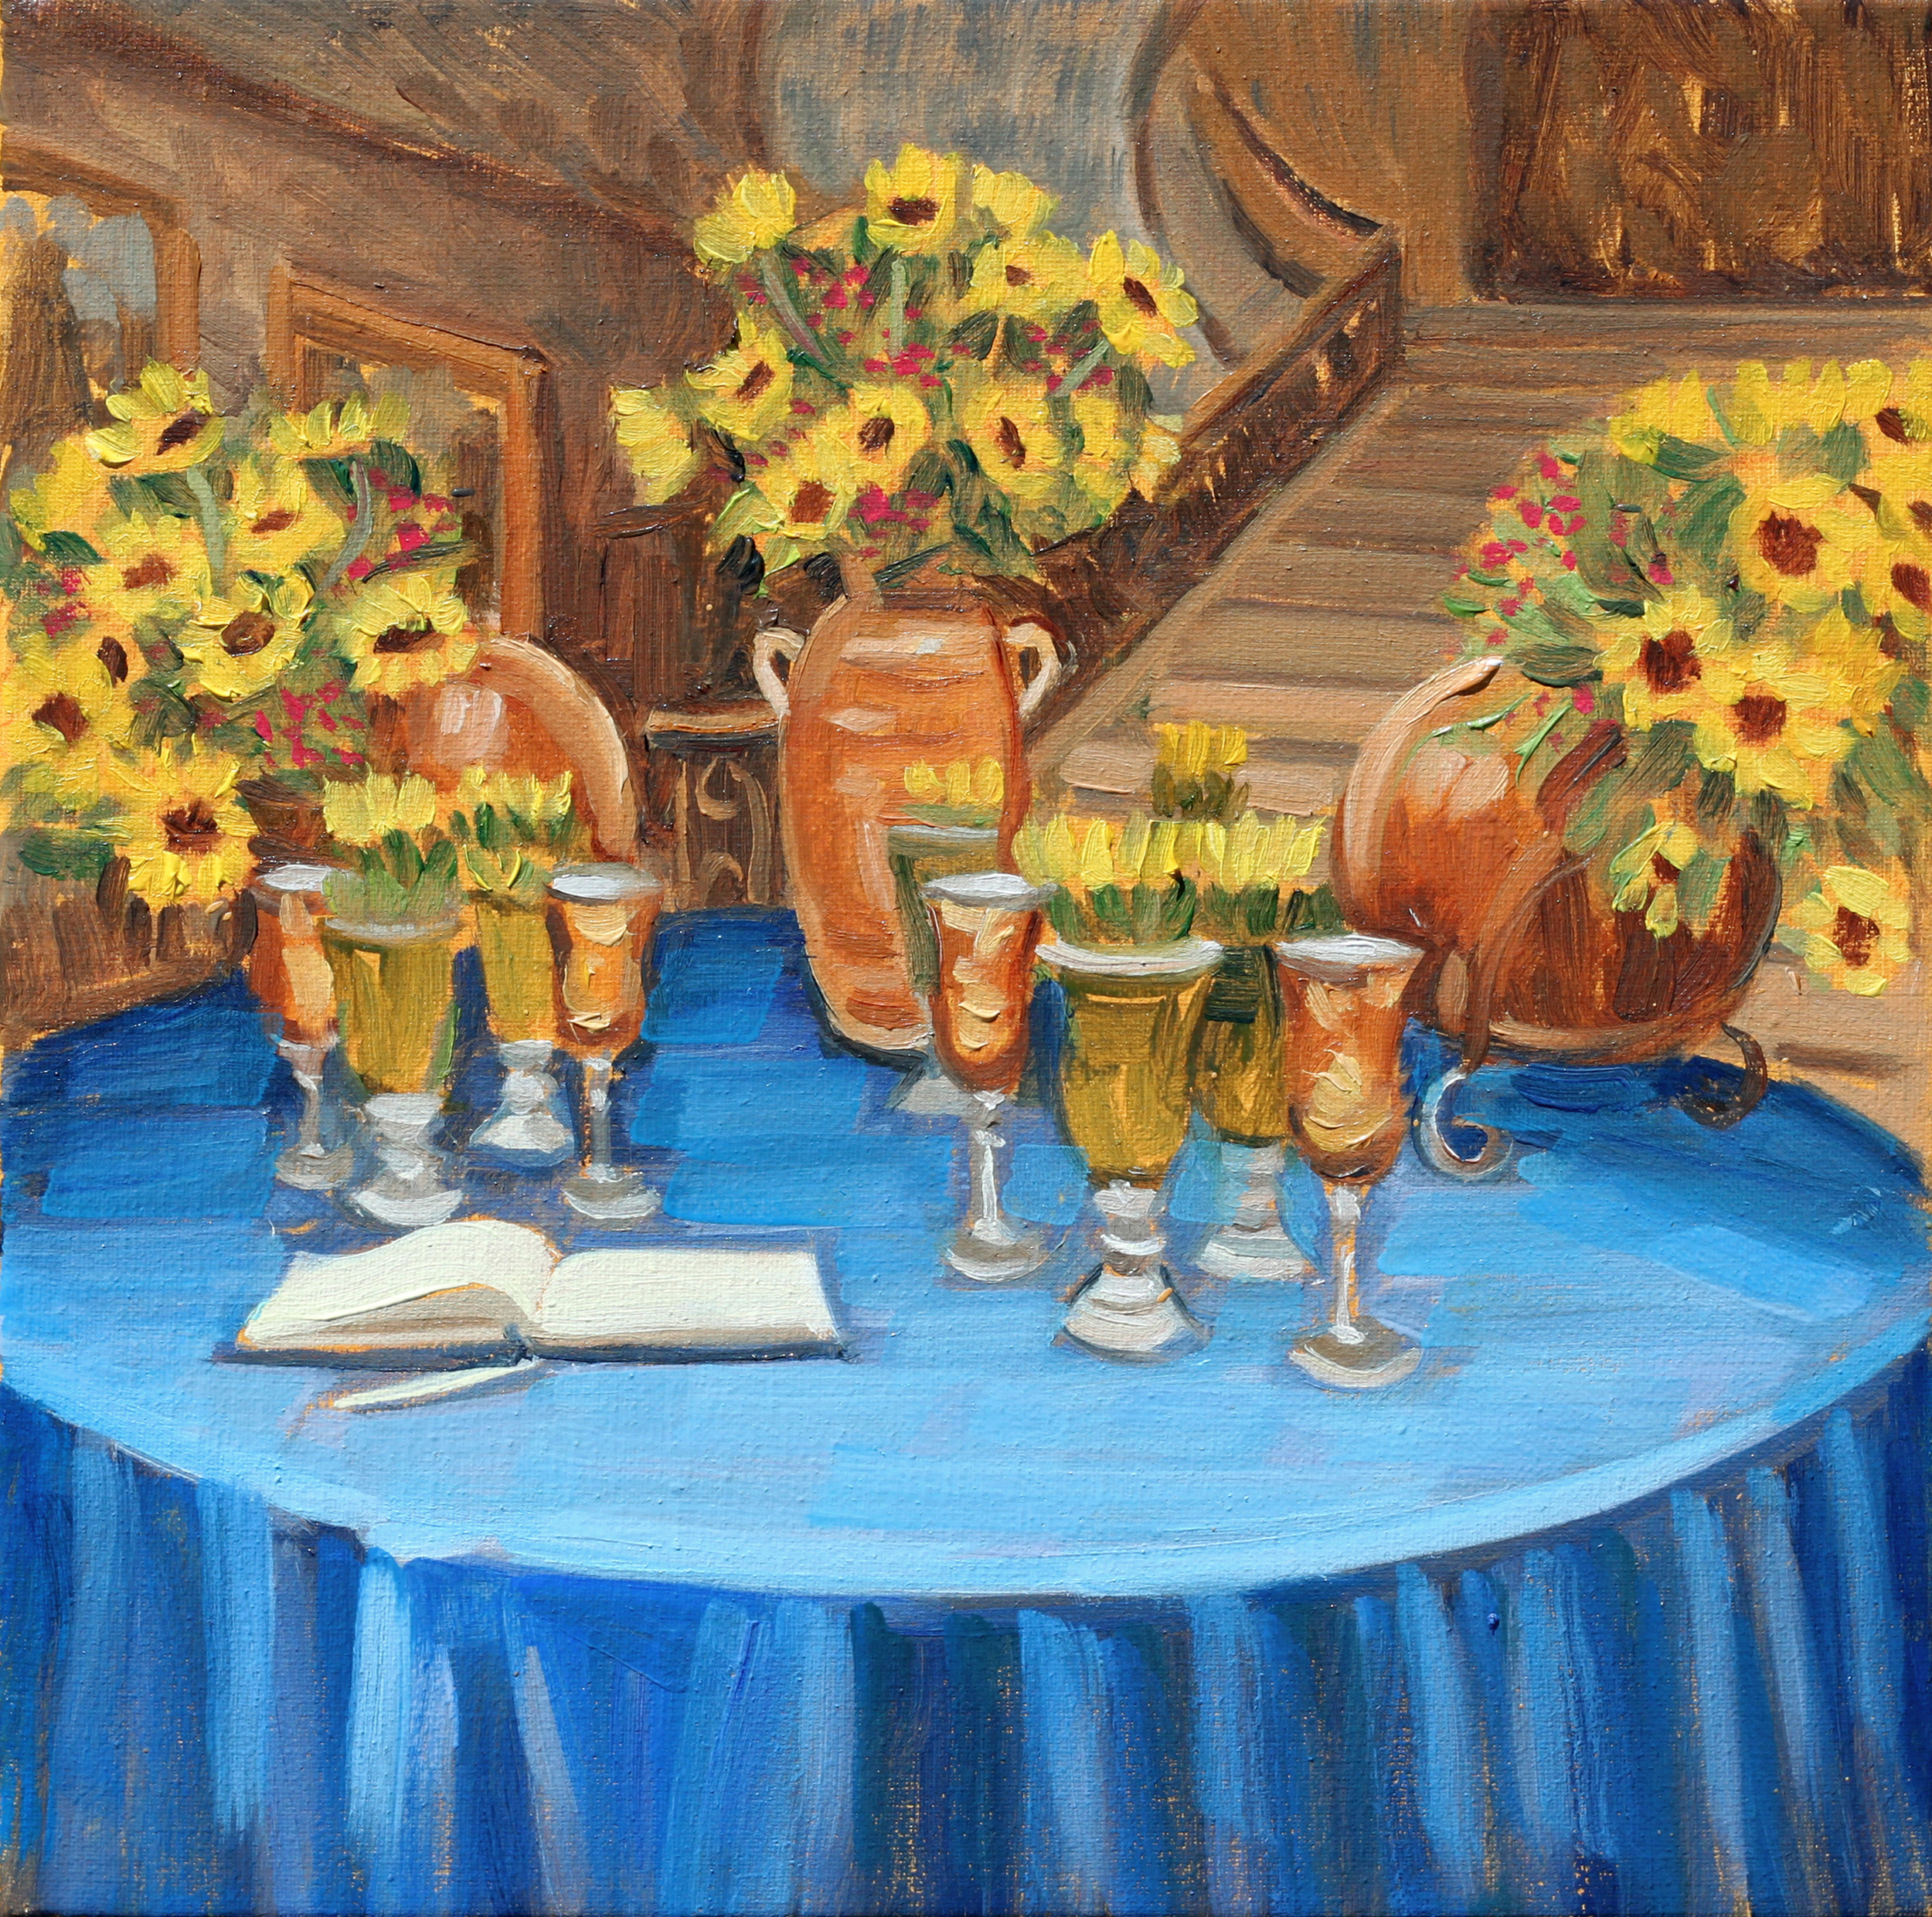 wedding-guest-table-sunflowers-painted-wedding-gift-artist-ben-keys-wed-on-canvas